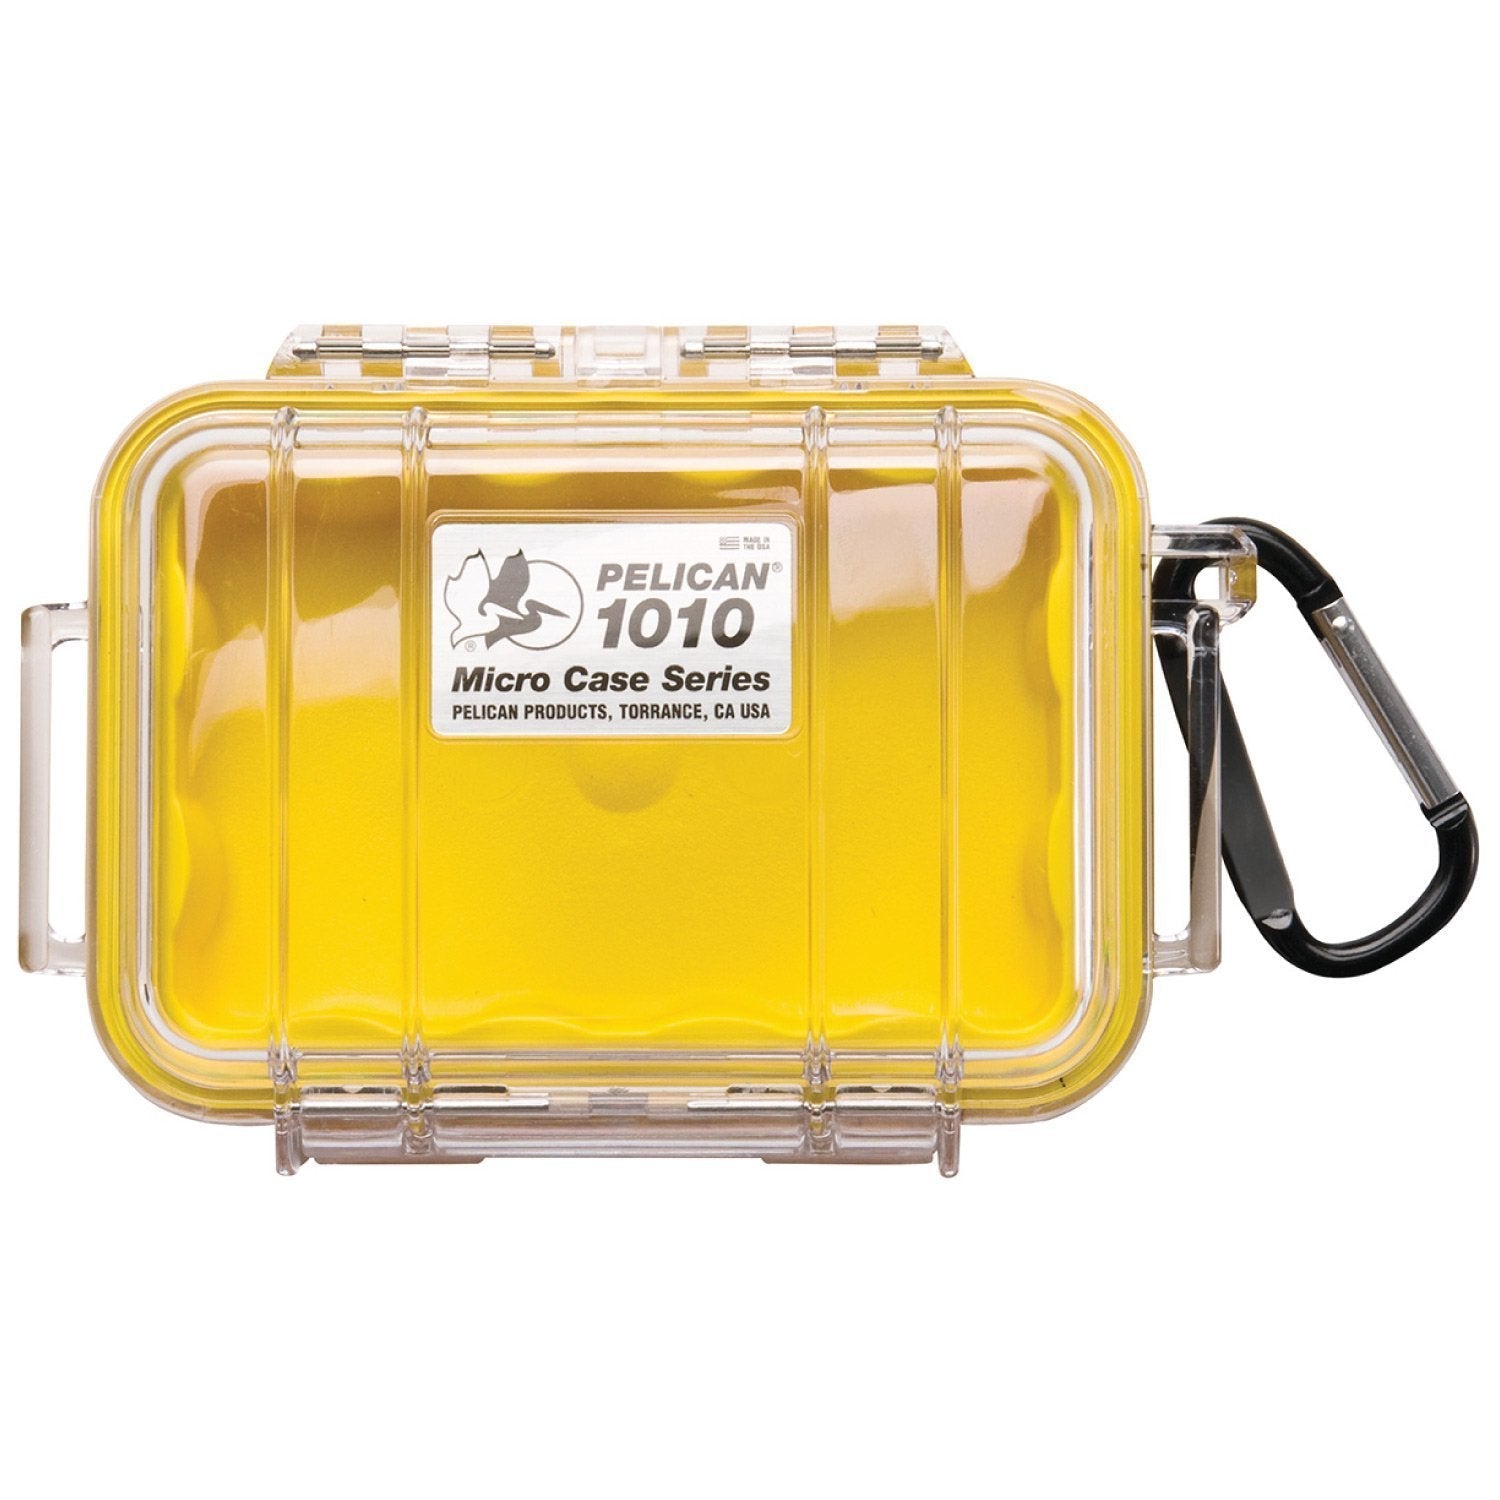 Pelican 1010 Micro Case Cases Pelican Products Clear Shell with Yellow Liner Tactical Gear Supplier Tactical Distributors Australia